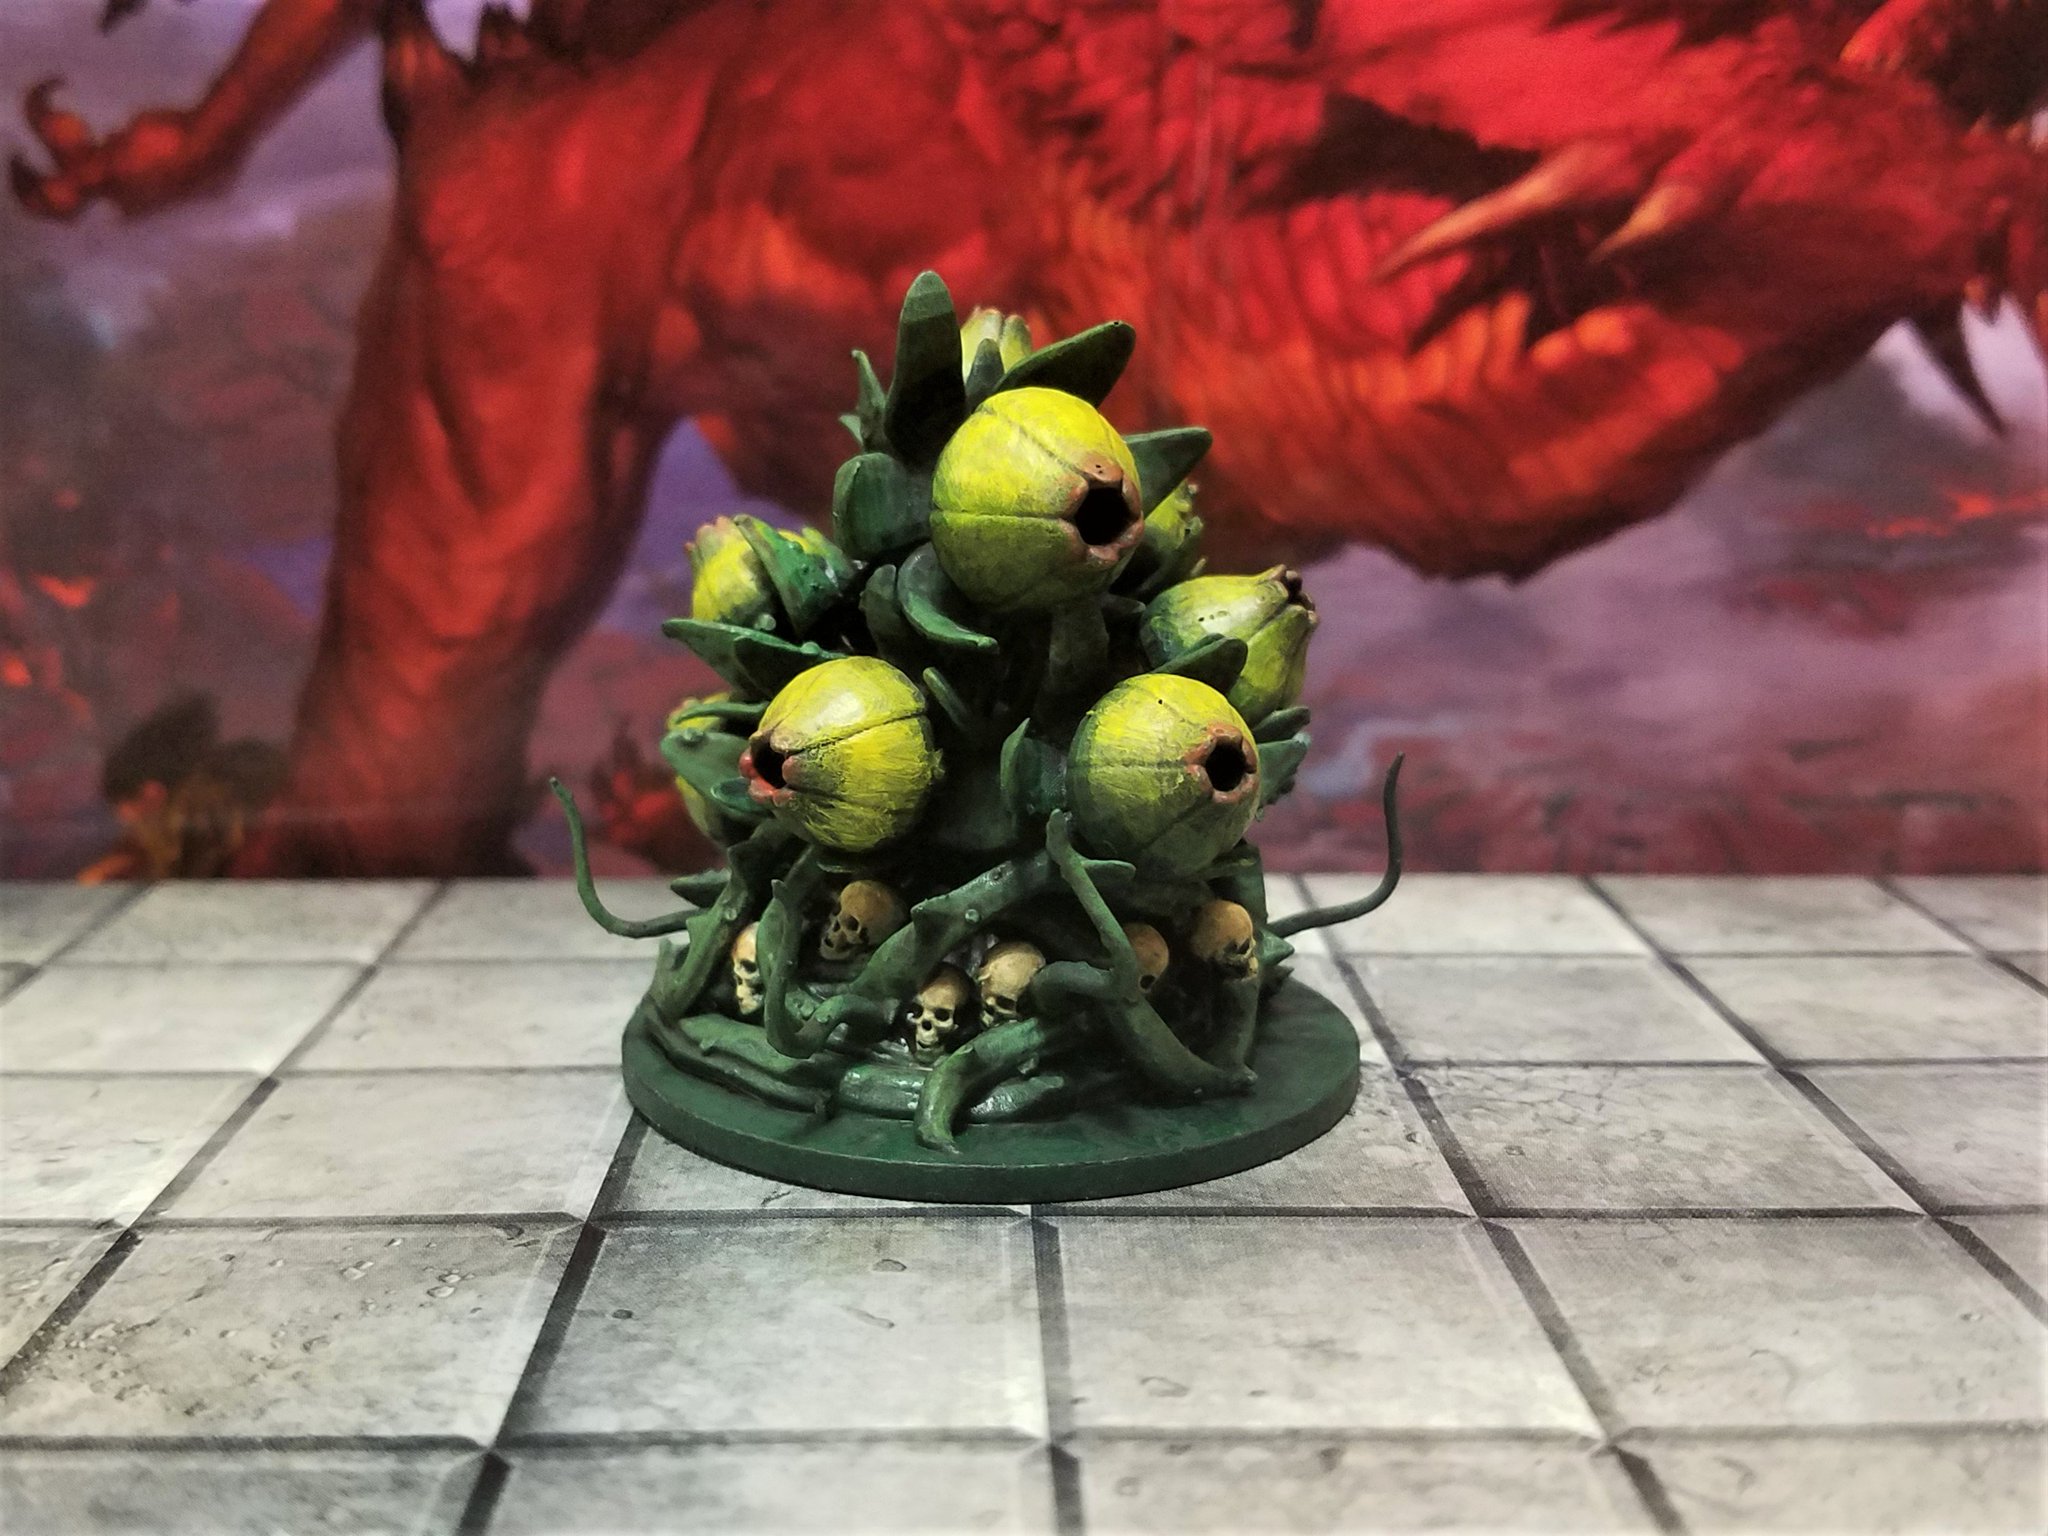 t.co/lCXAORyQxG 

Next up are the Deathlocks! #dnd #3dmodel...